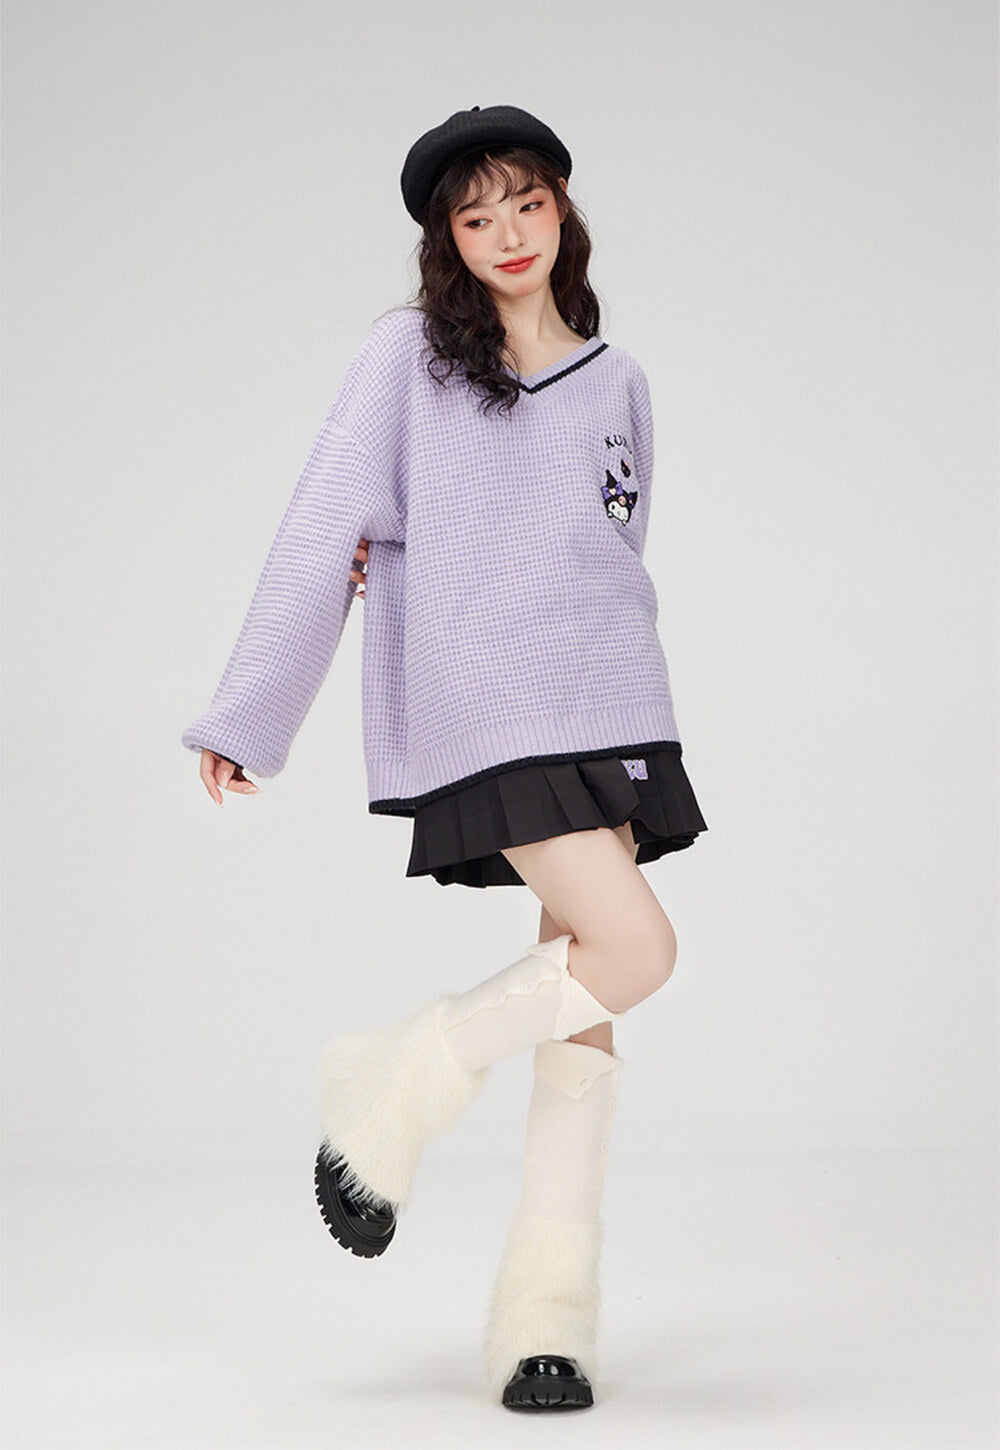 Kuromi-outfit-loose-knit-cricket-sweater-with-star-embroidery-sailor-collar